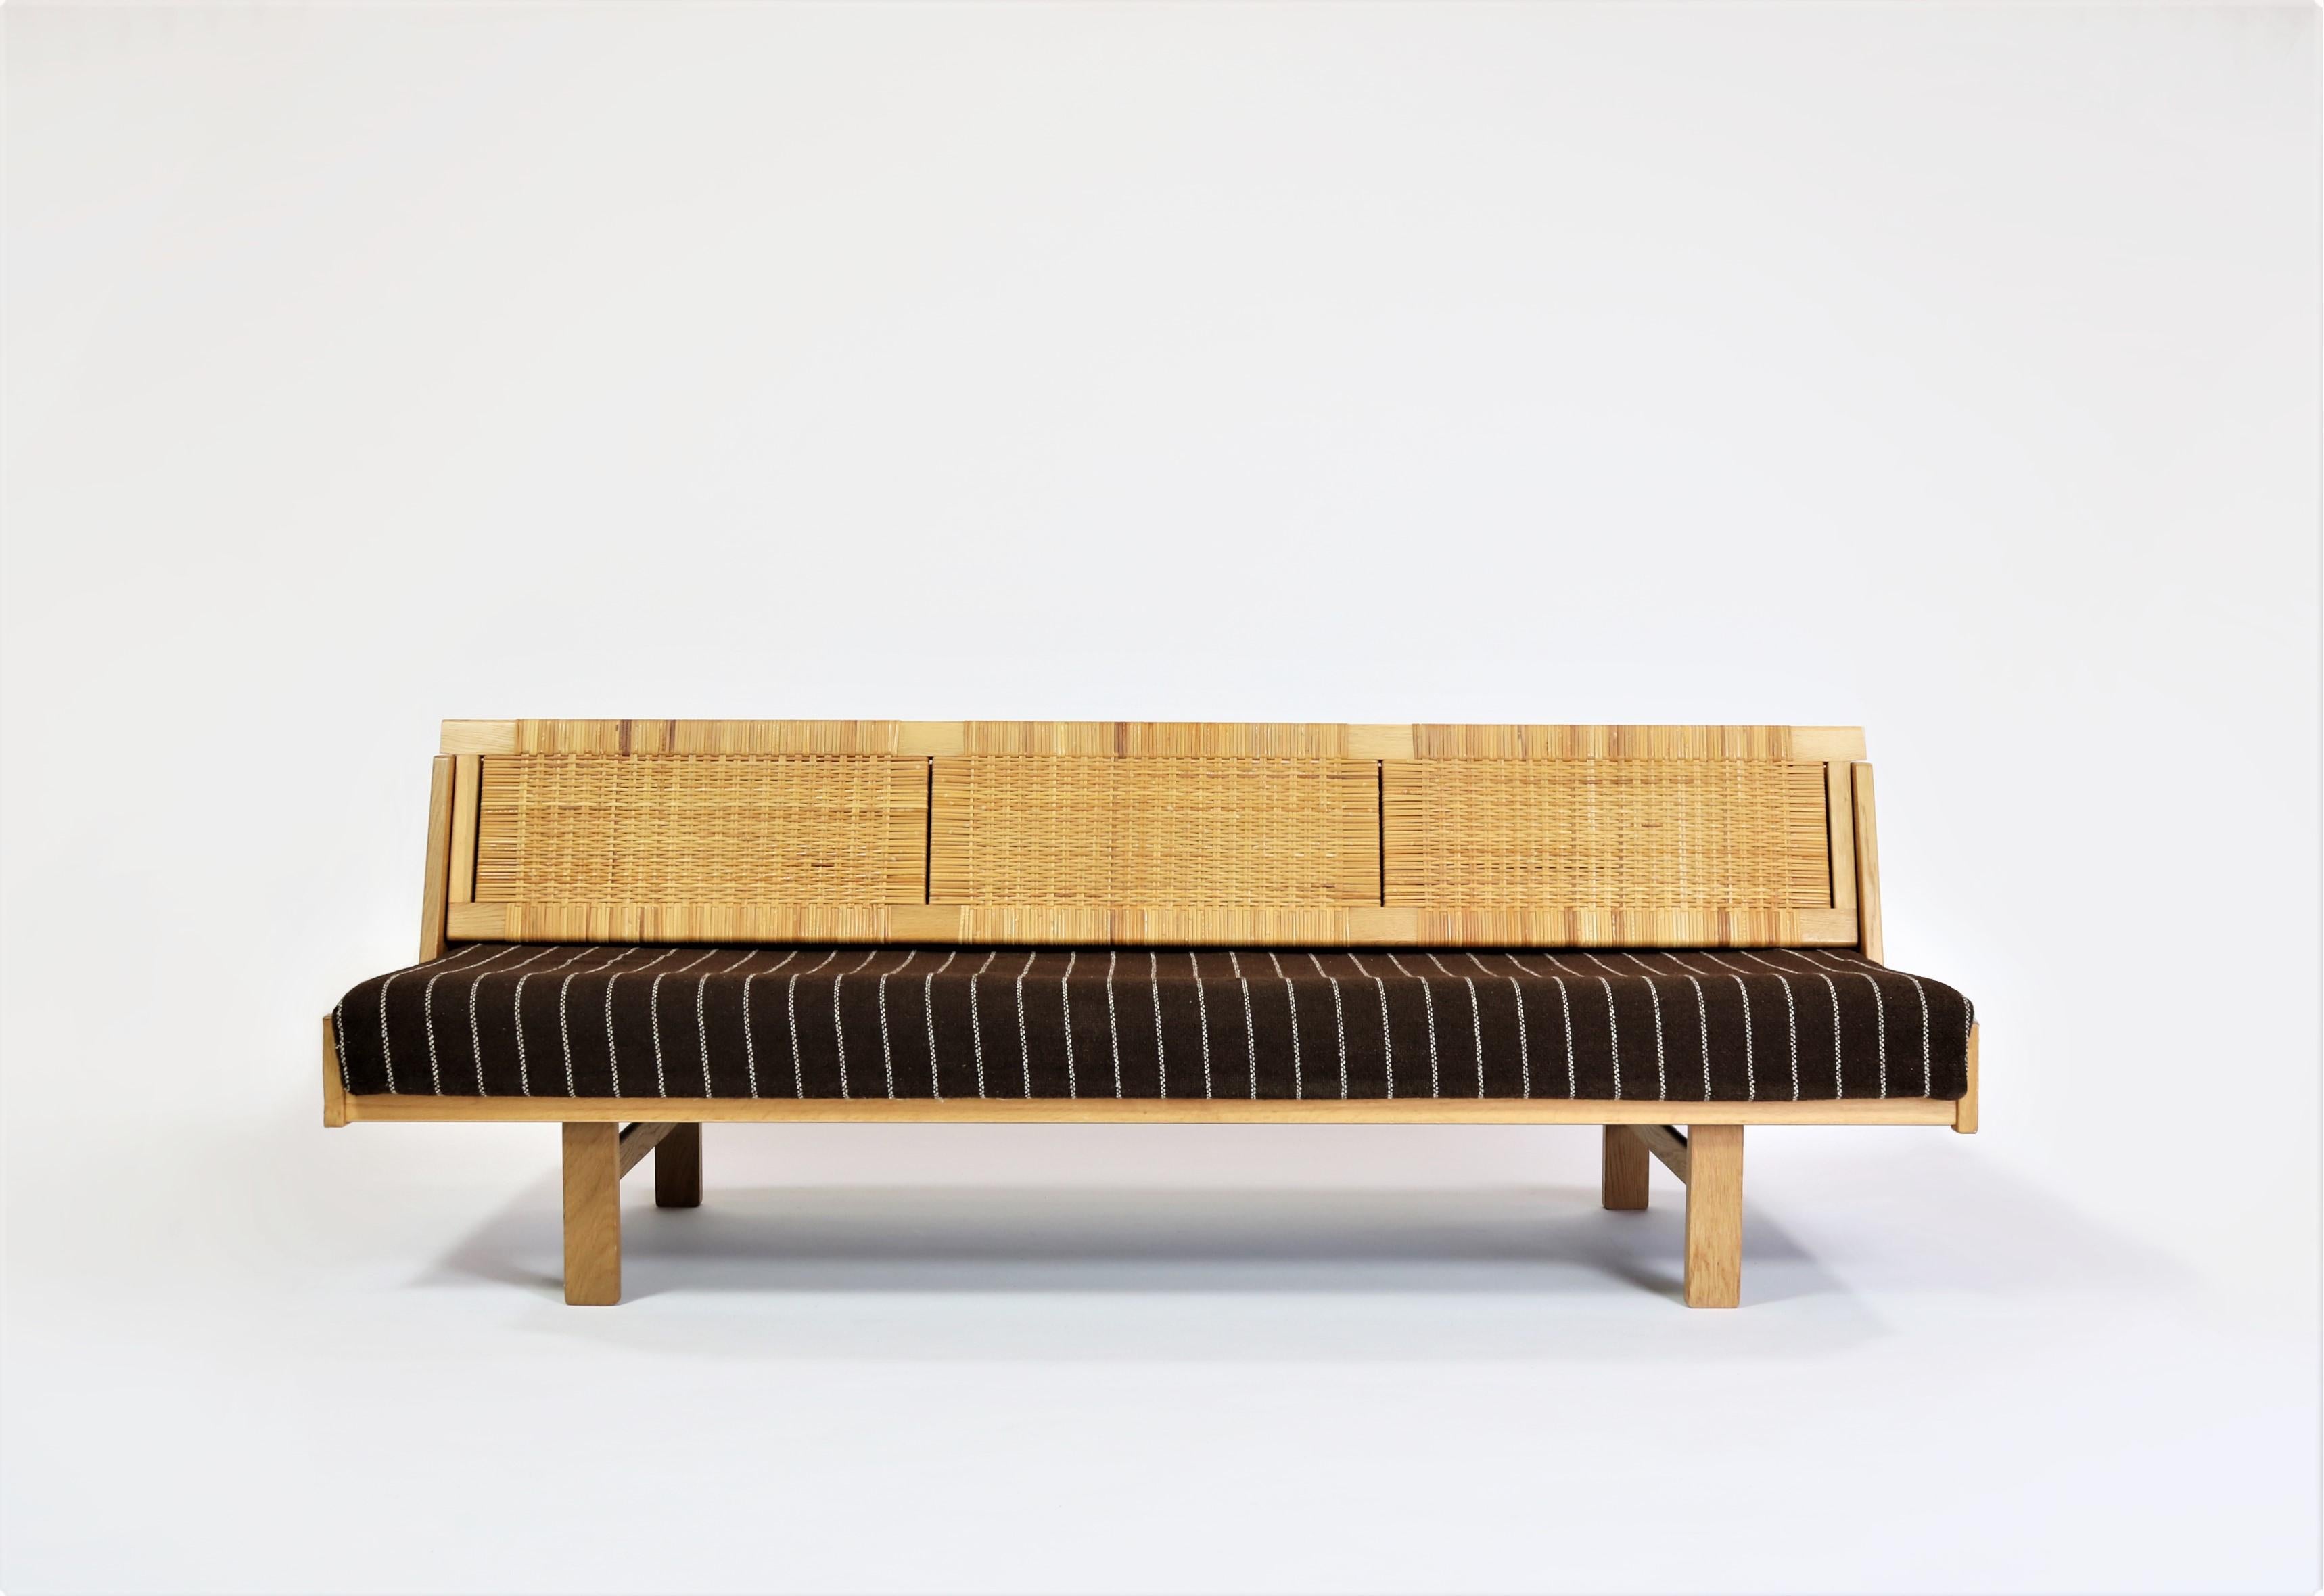 Designed by Hans Wegner for GETAMA this amazing convertible daybed / sofa features a beautifully patinated oak frame and woven cane / rattan back seat which reveals a hidden space for blankets, pillows etc. It also allows for more space to serve as